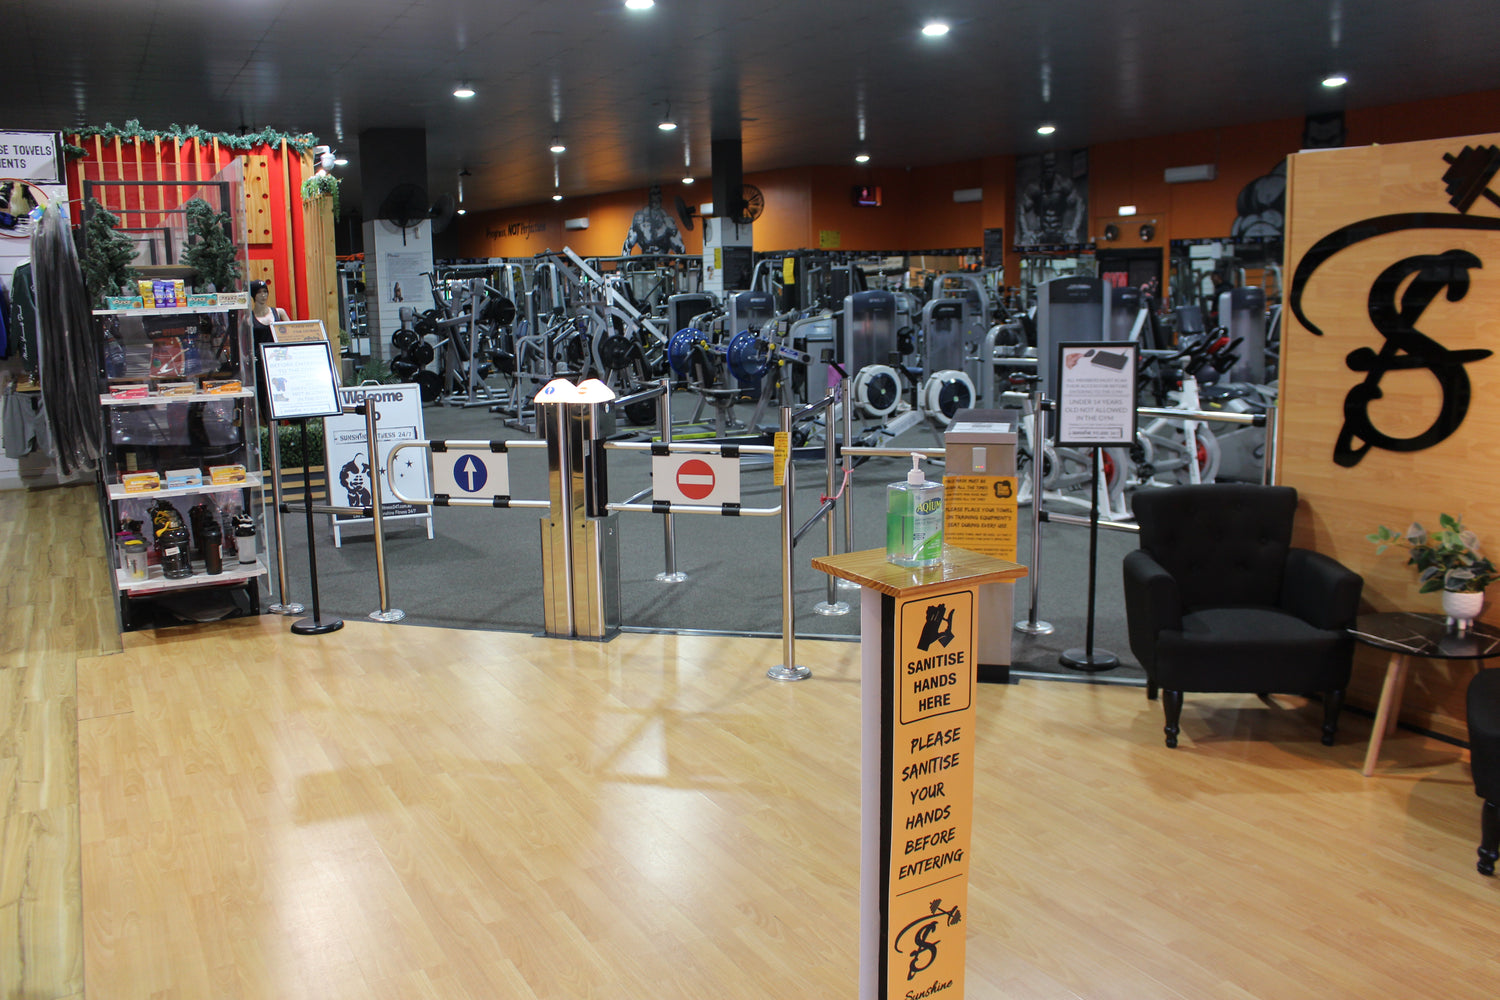 All memberships include – Sunshine Fitness 24/7